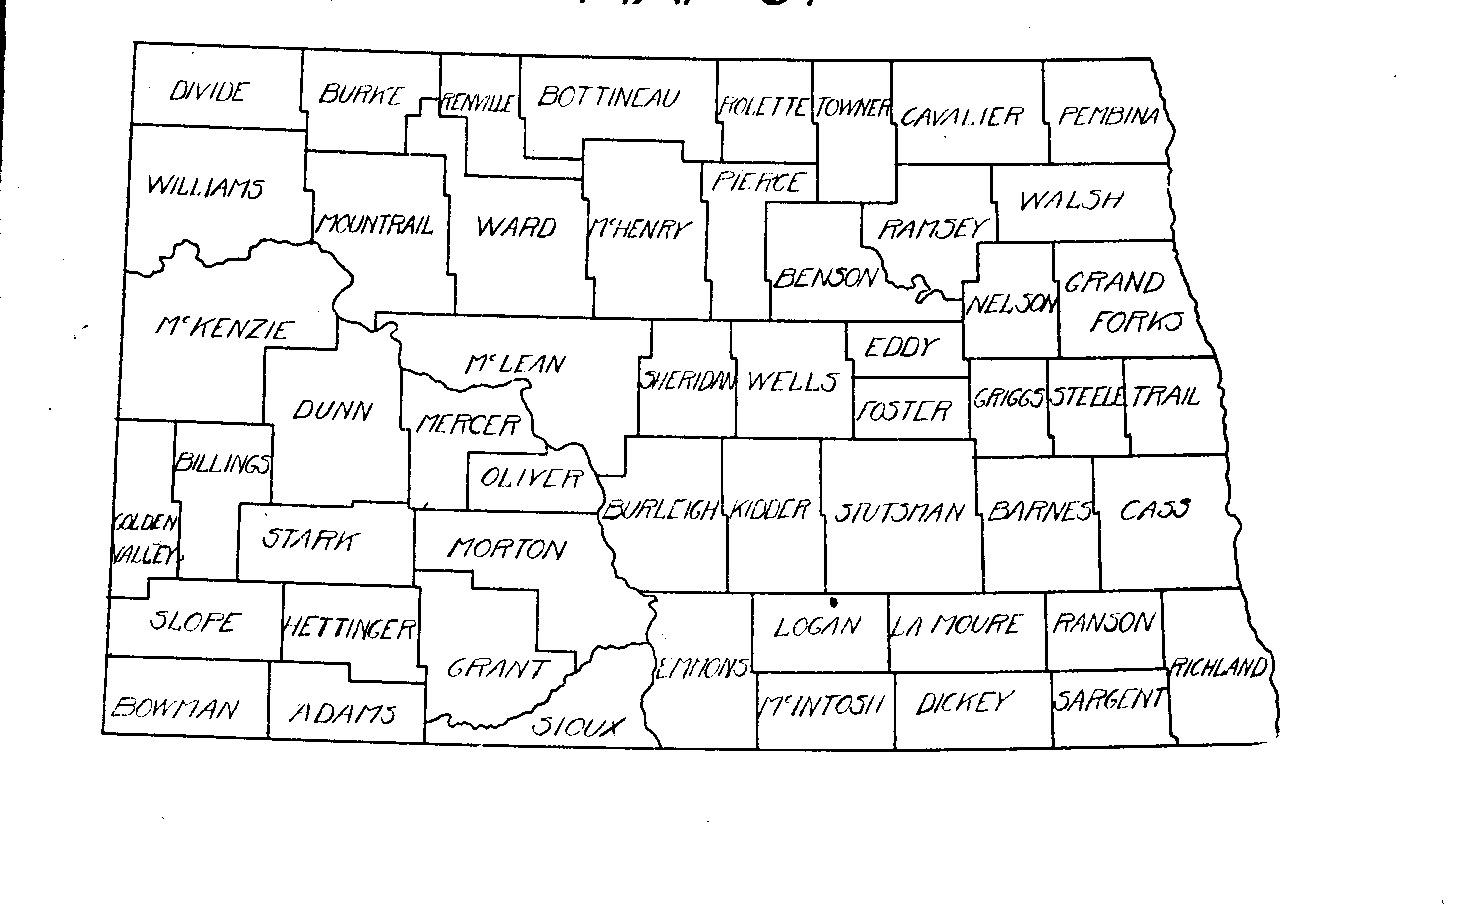 This is the state of North Dakota in 1916, which is the same as North Dakota today (2014). Between 1889 and 1916, several counties were changed in shape or re-named. Grant County was the last county created.